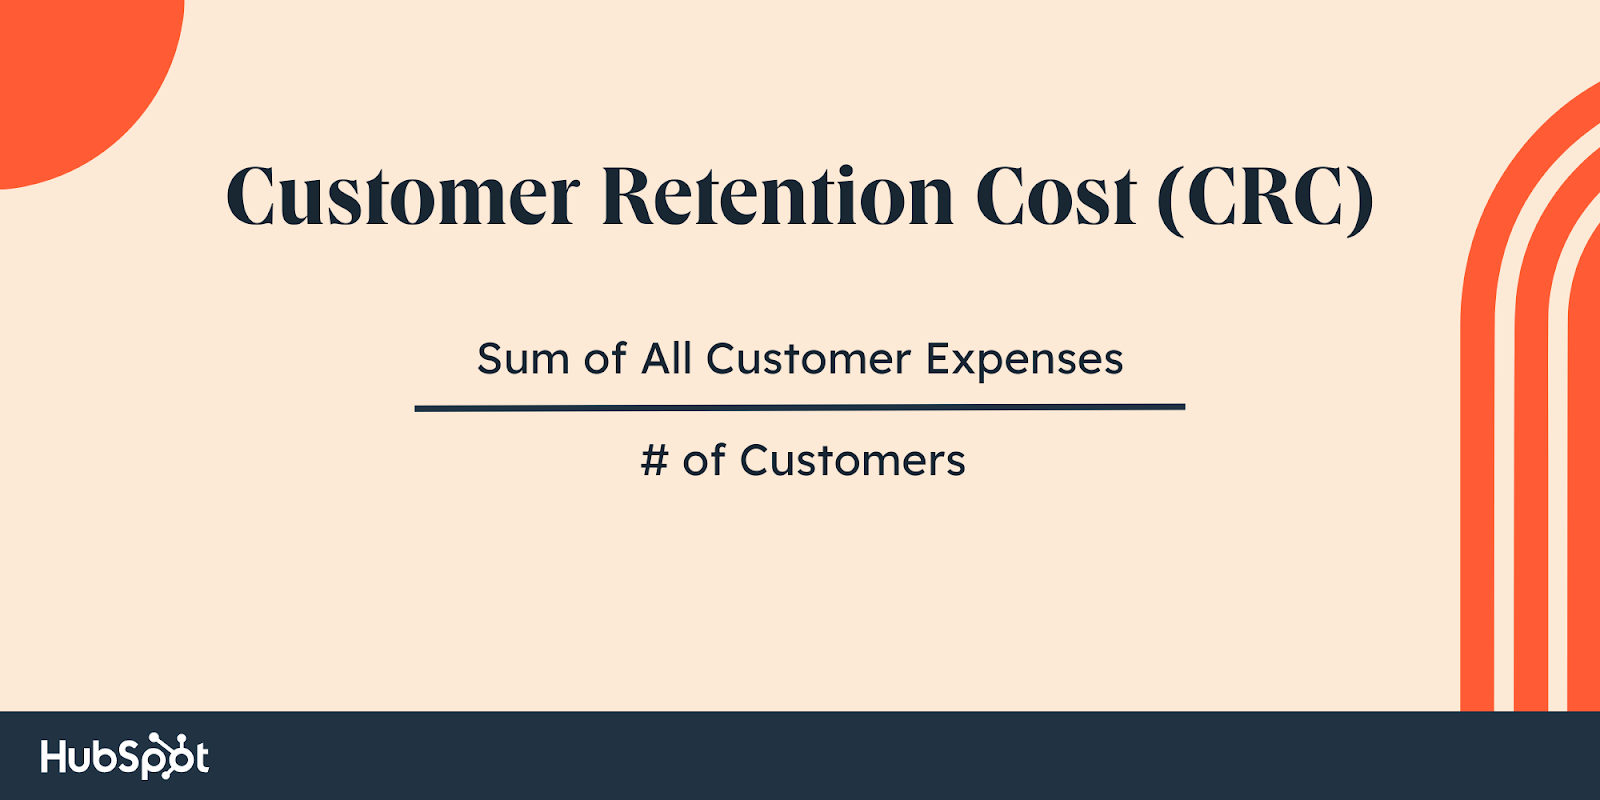 It’s important to measure how much customer retention costs your business.